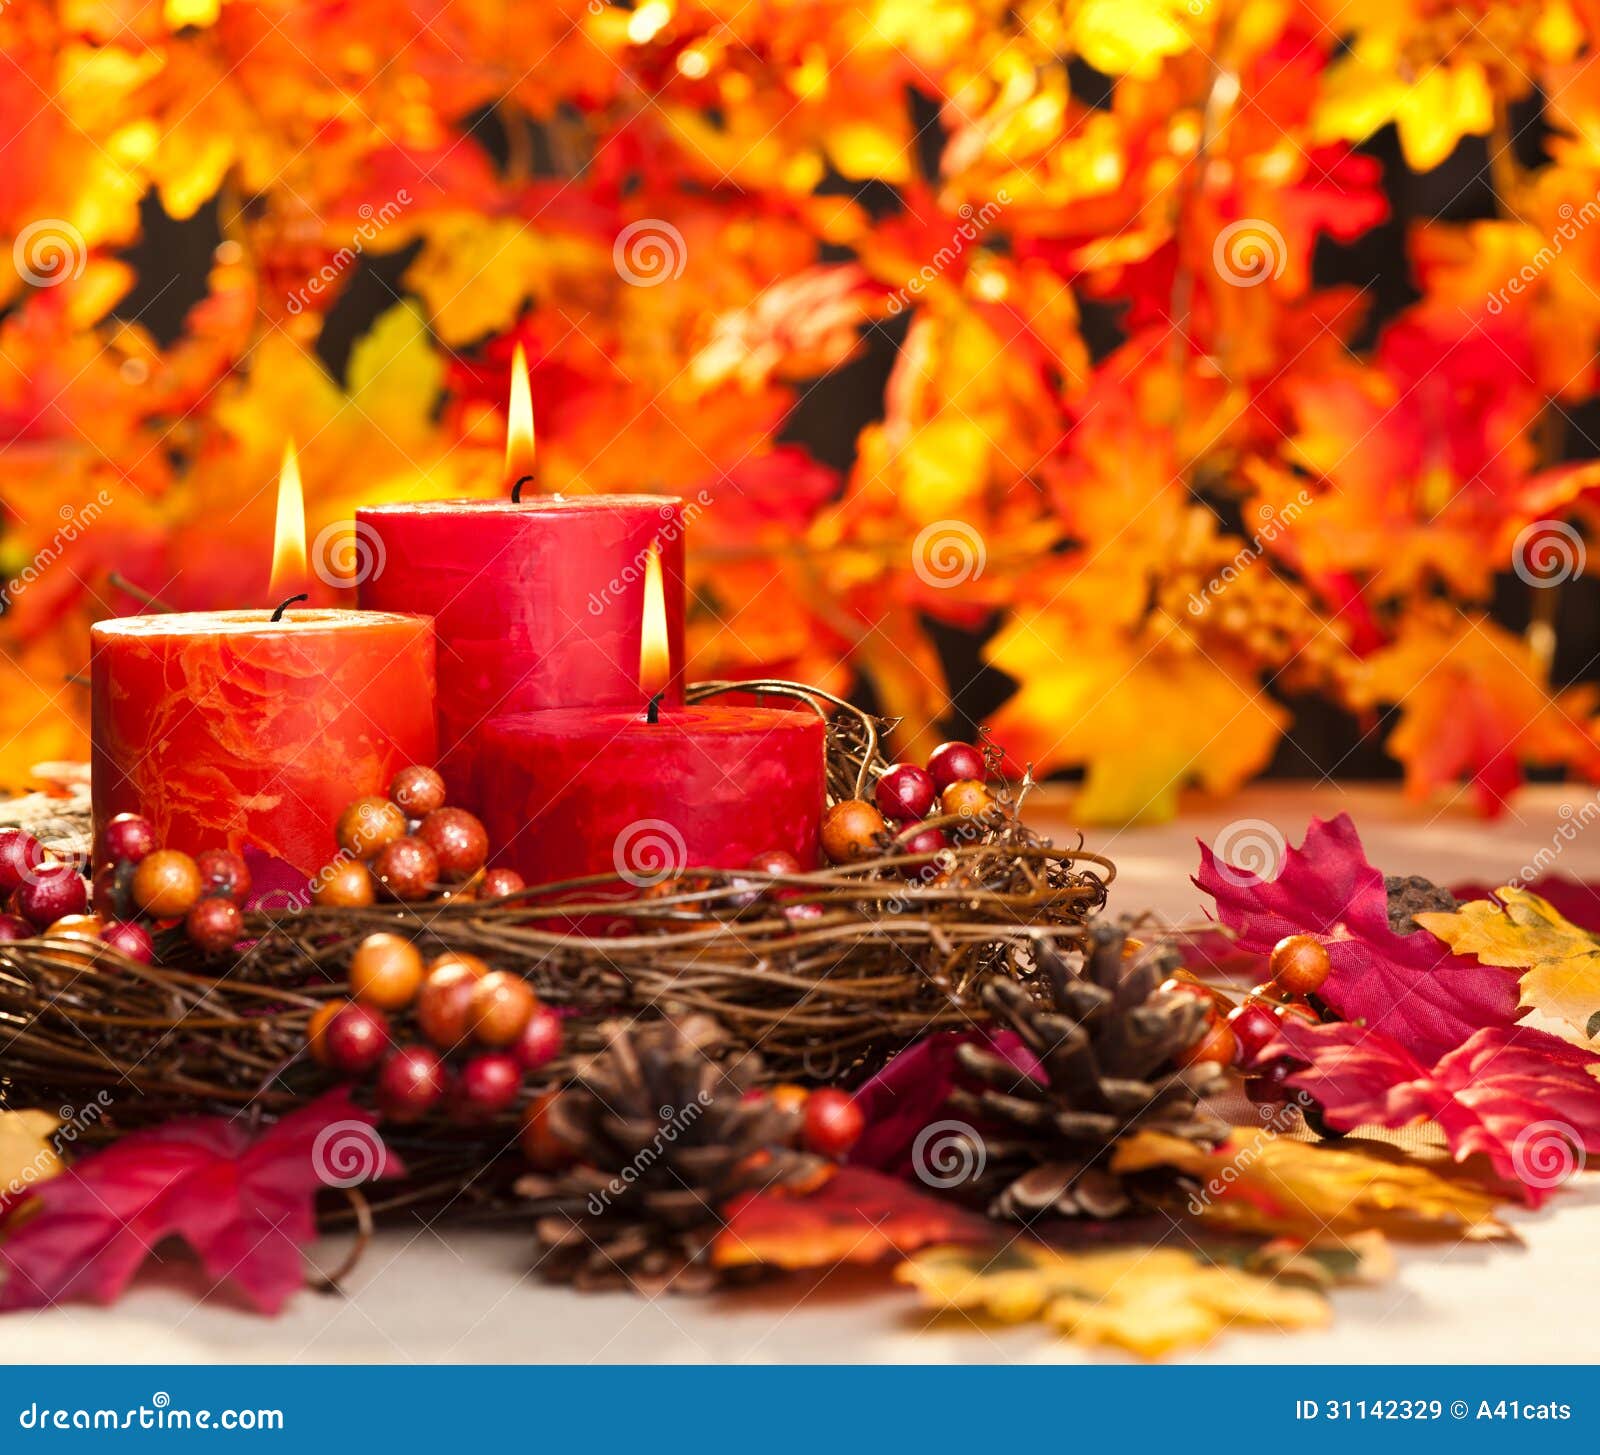 Autumn Candles Royalty Free Stock Images - Image: 31142329